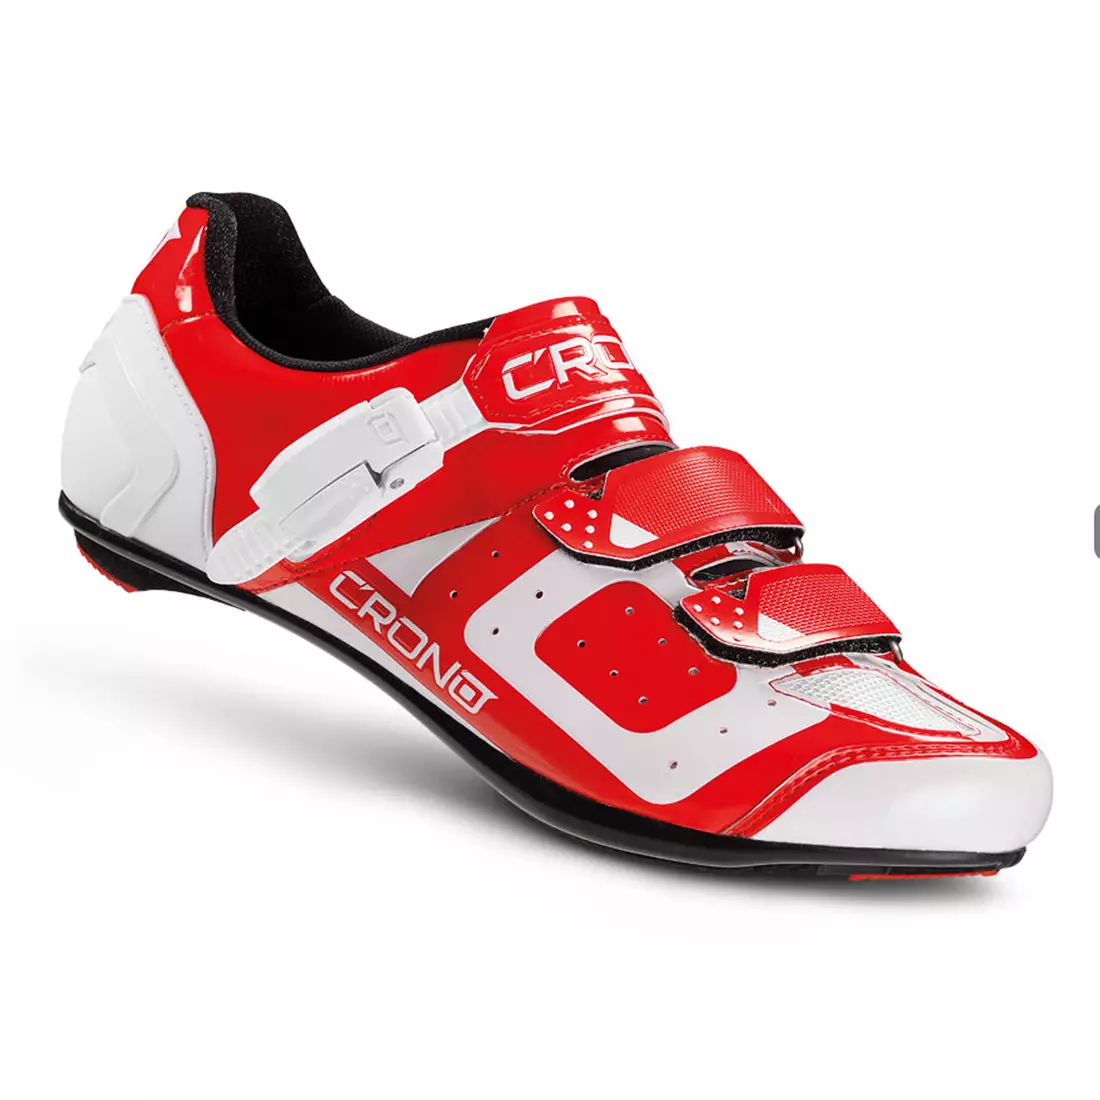 CRONO CR3 nylon - road cycling shoes, red | MikeSPORT